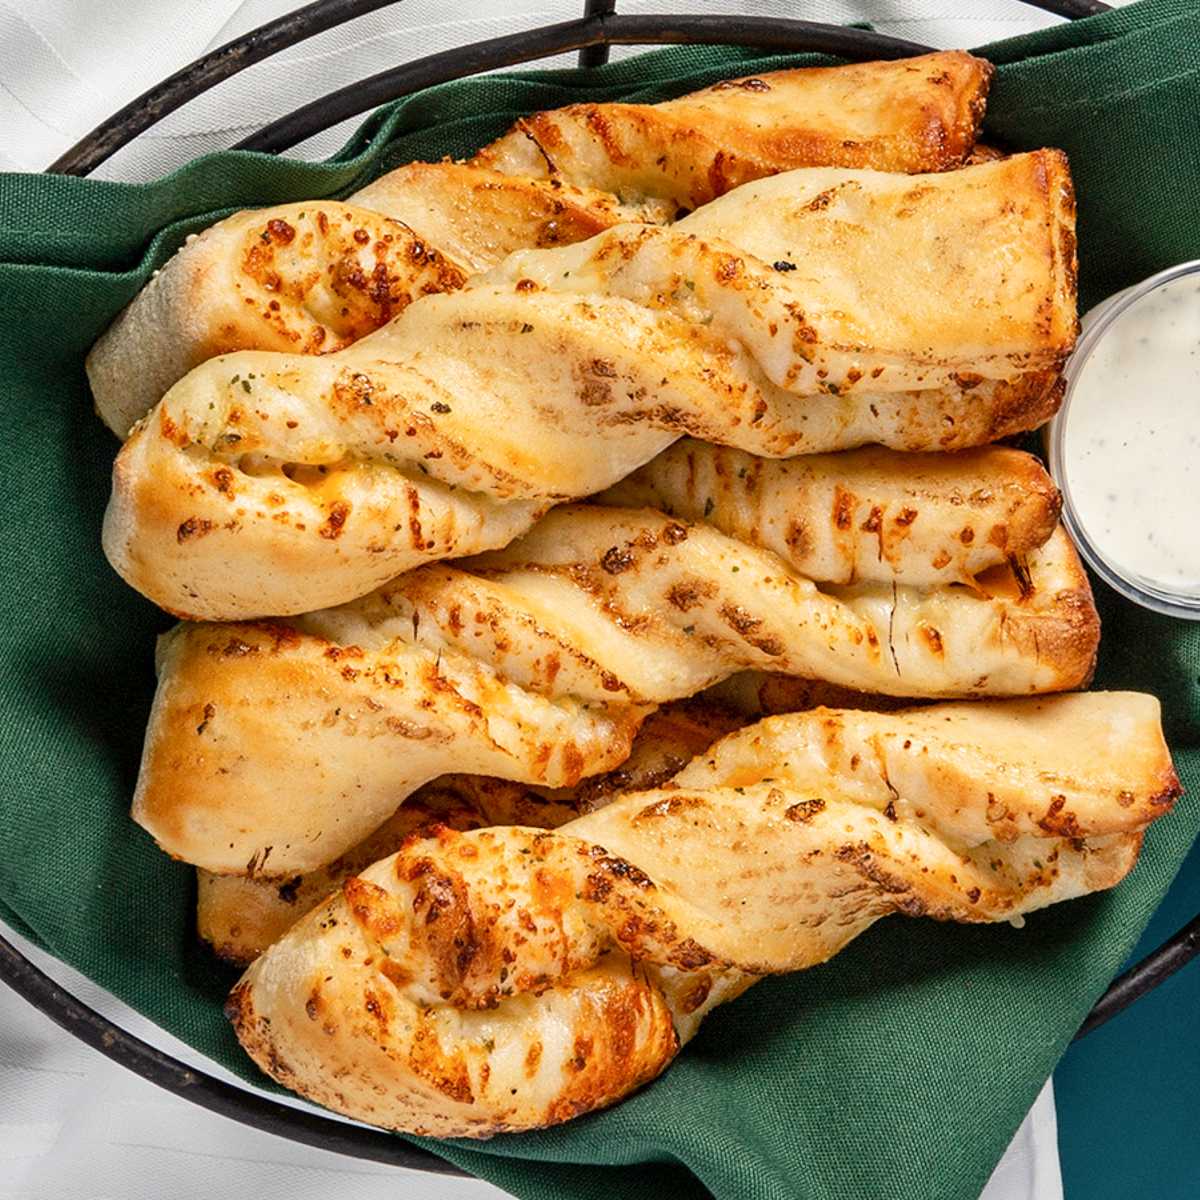 Round Table Delivery Takeout, Round Table Garlic Twists Calories